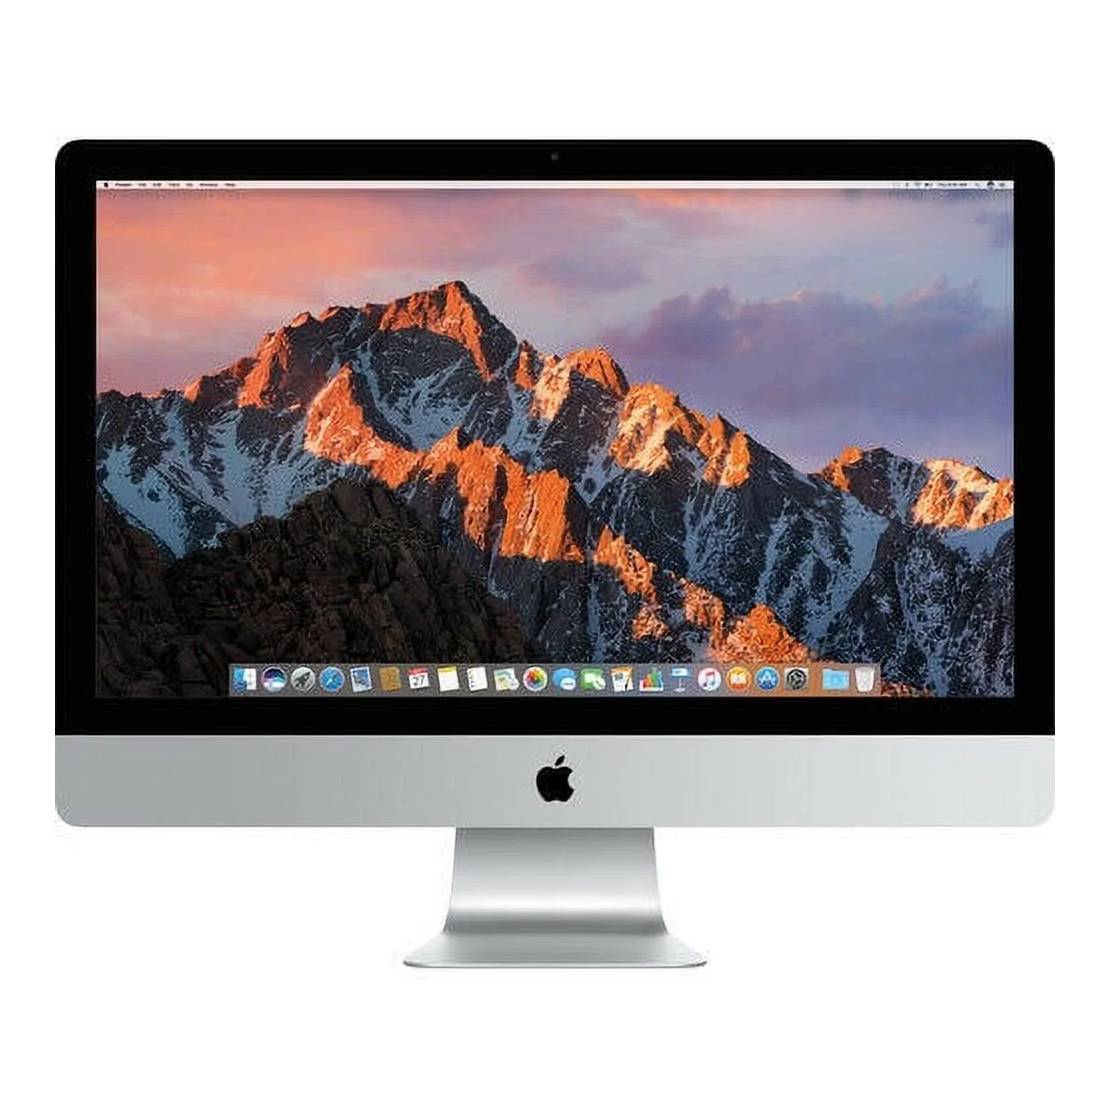 iMac 27 inch 2009 front